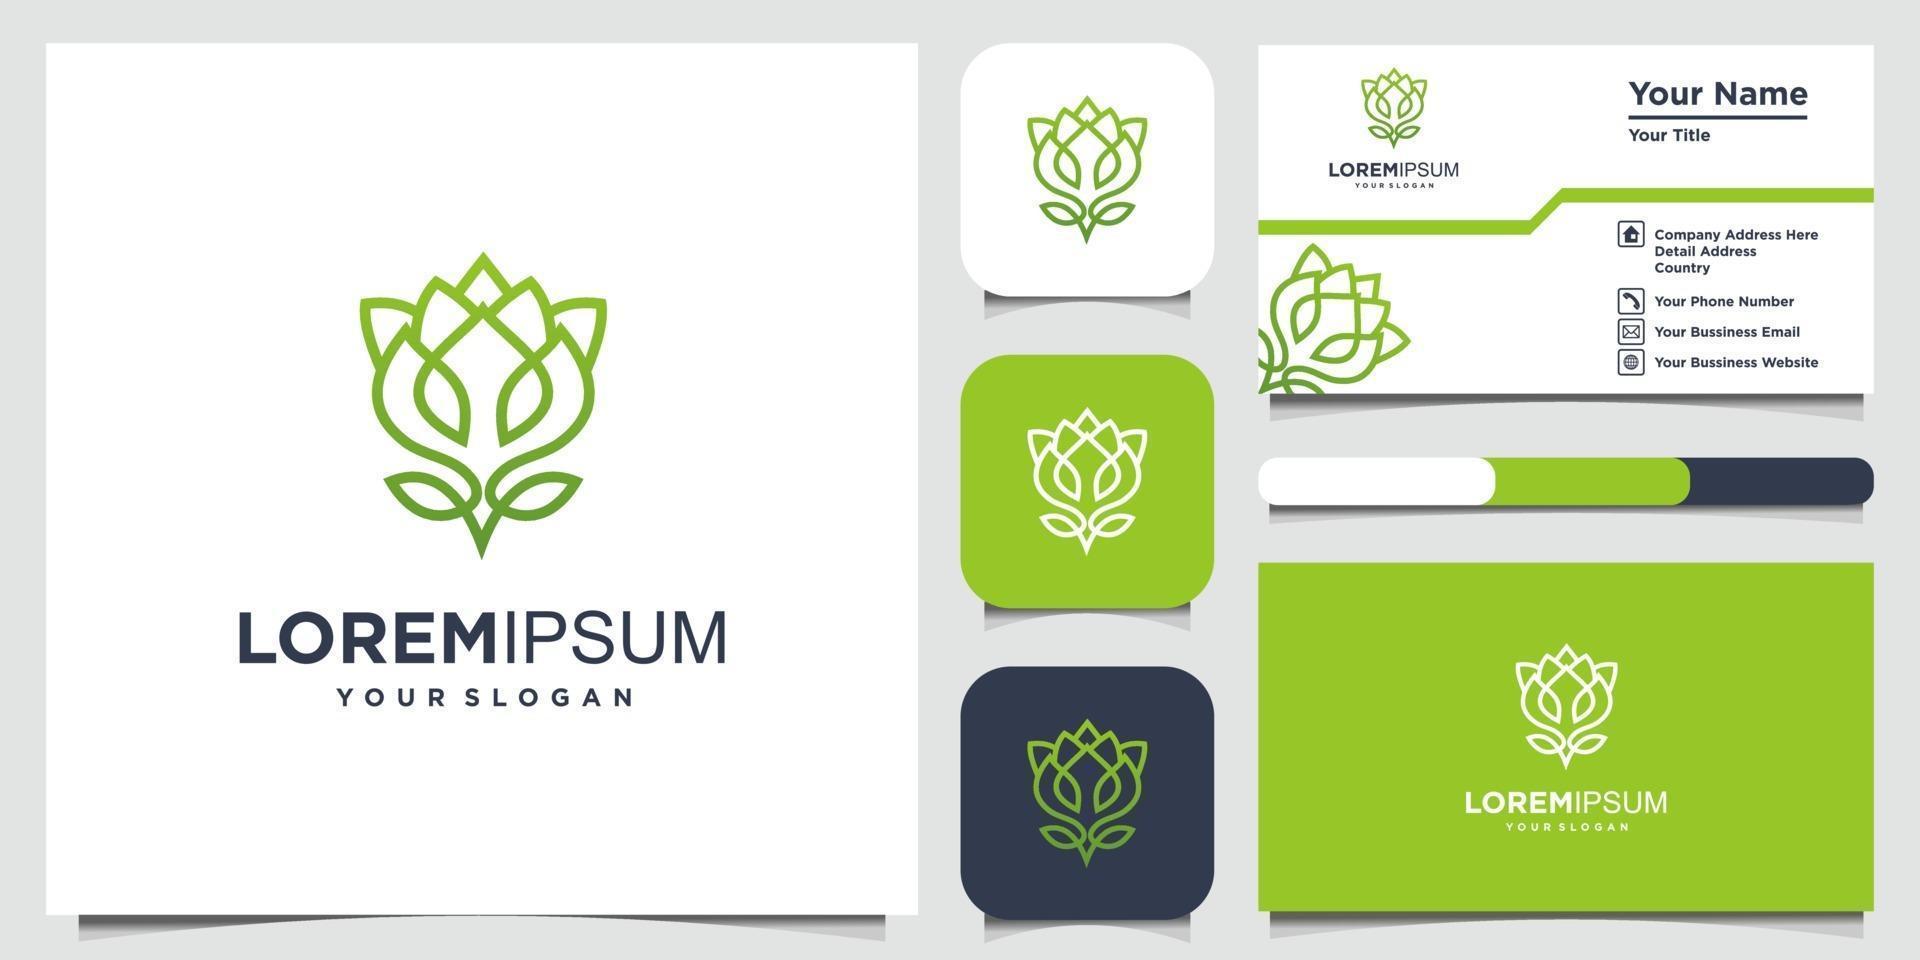 Flower logo design with line art style and business card vector